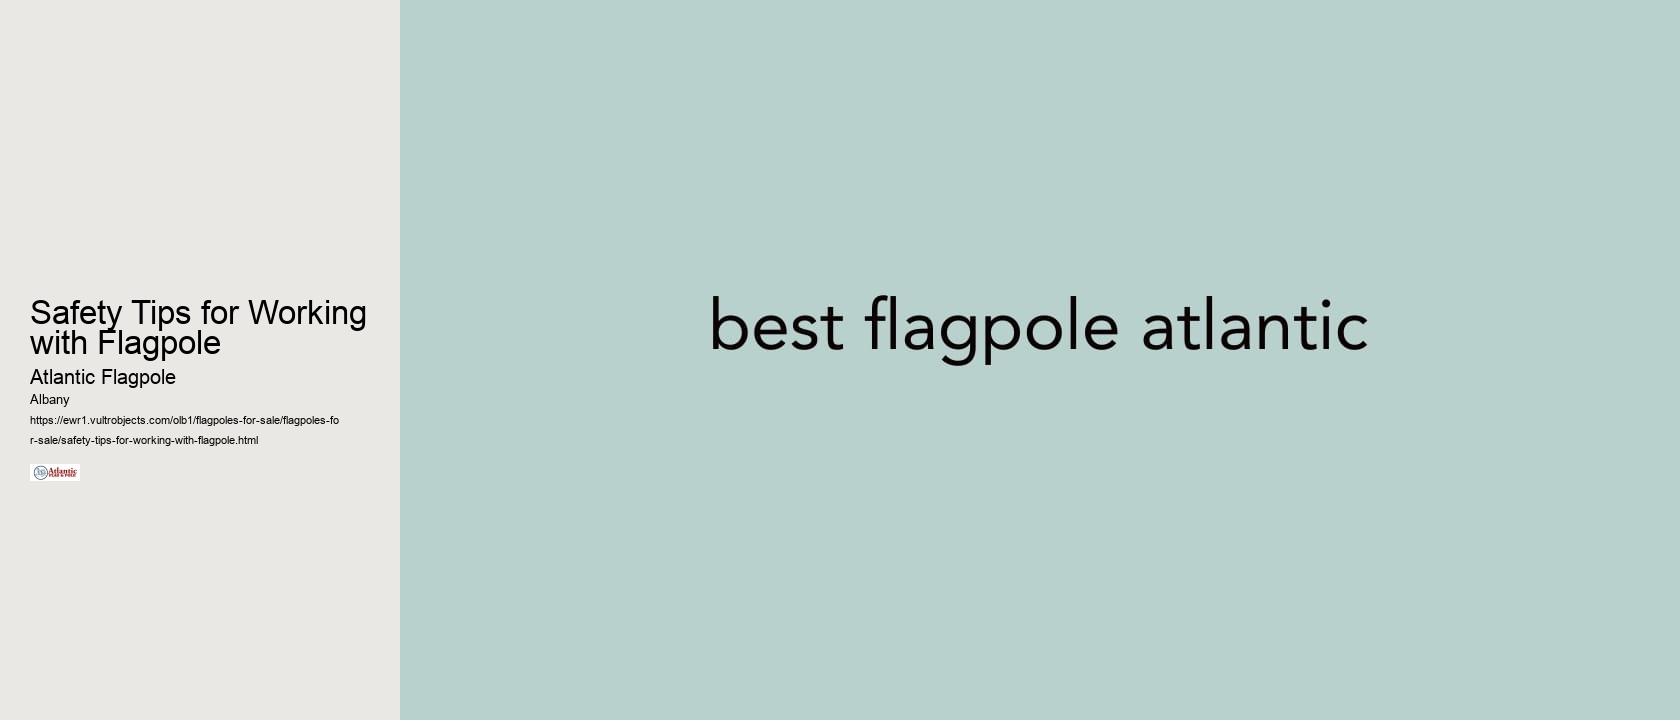 Safety Tips for Working with Flagpole